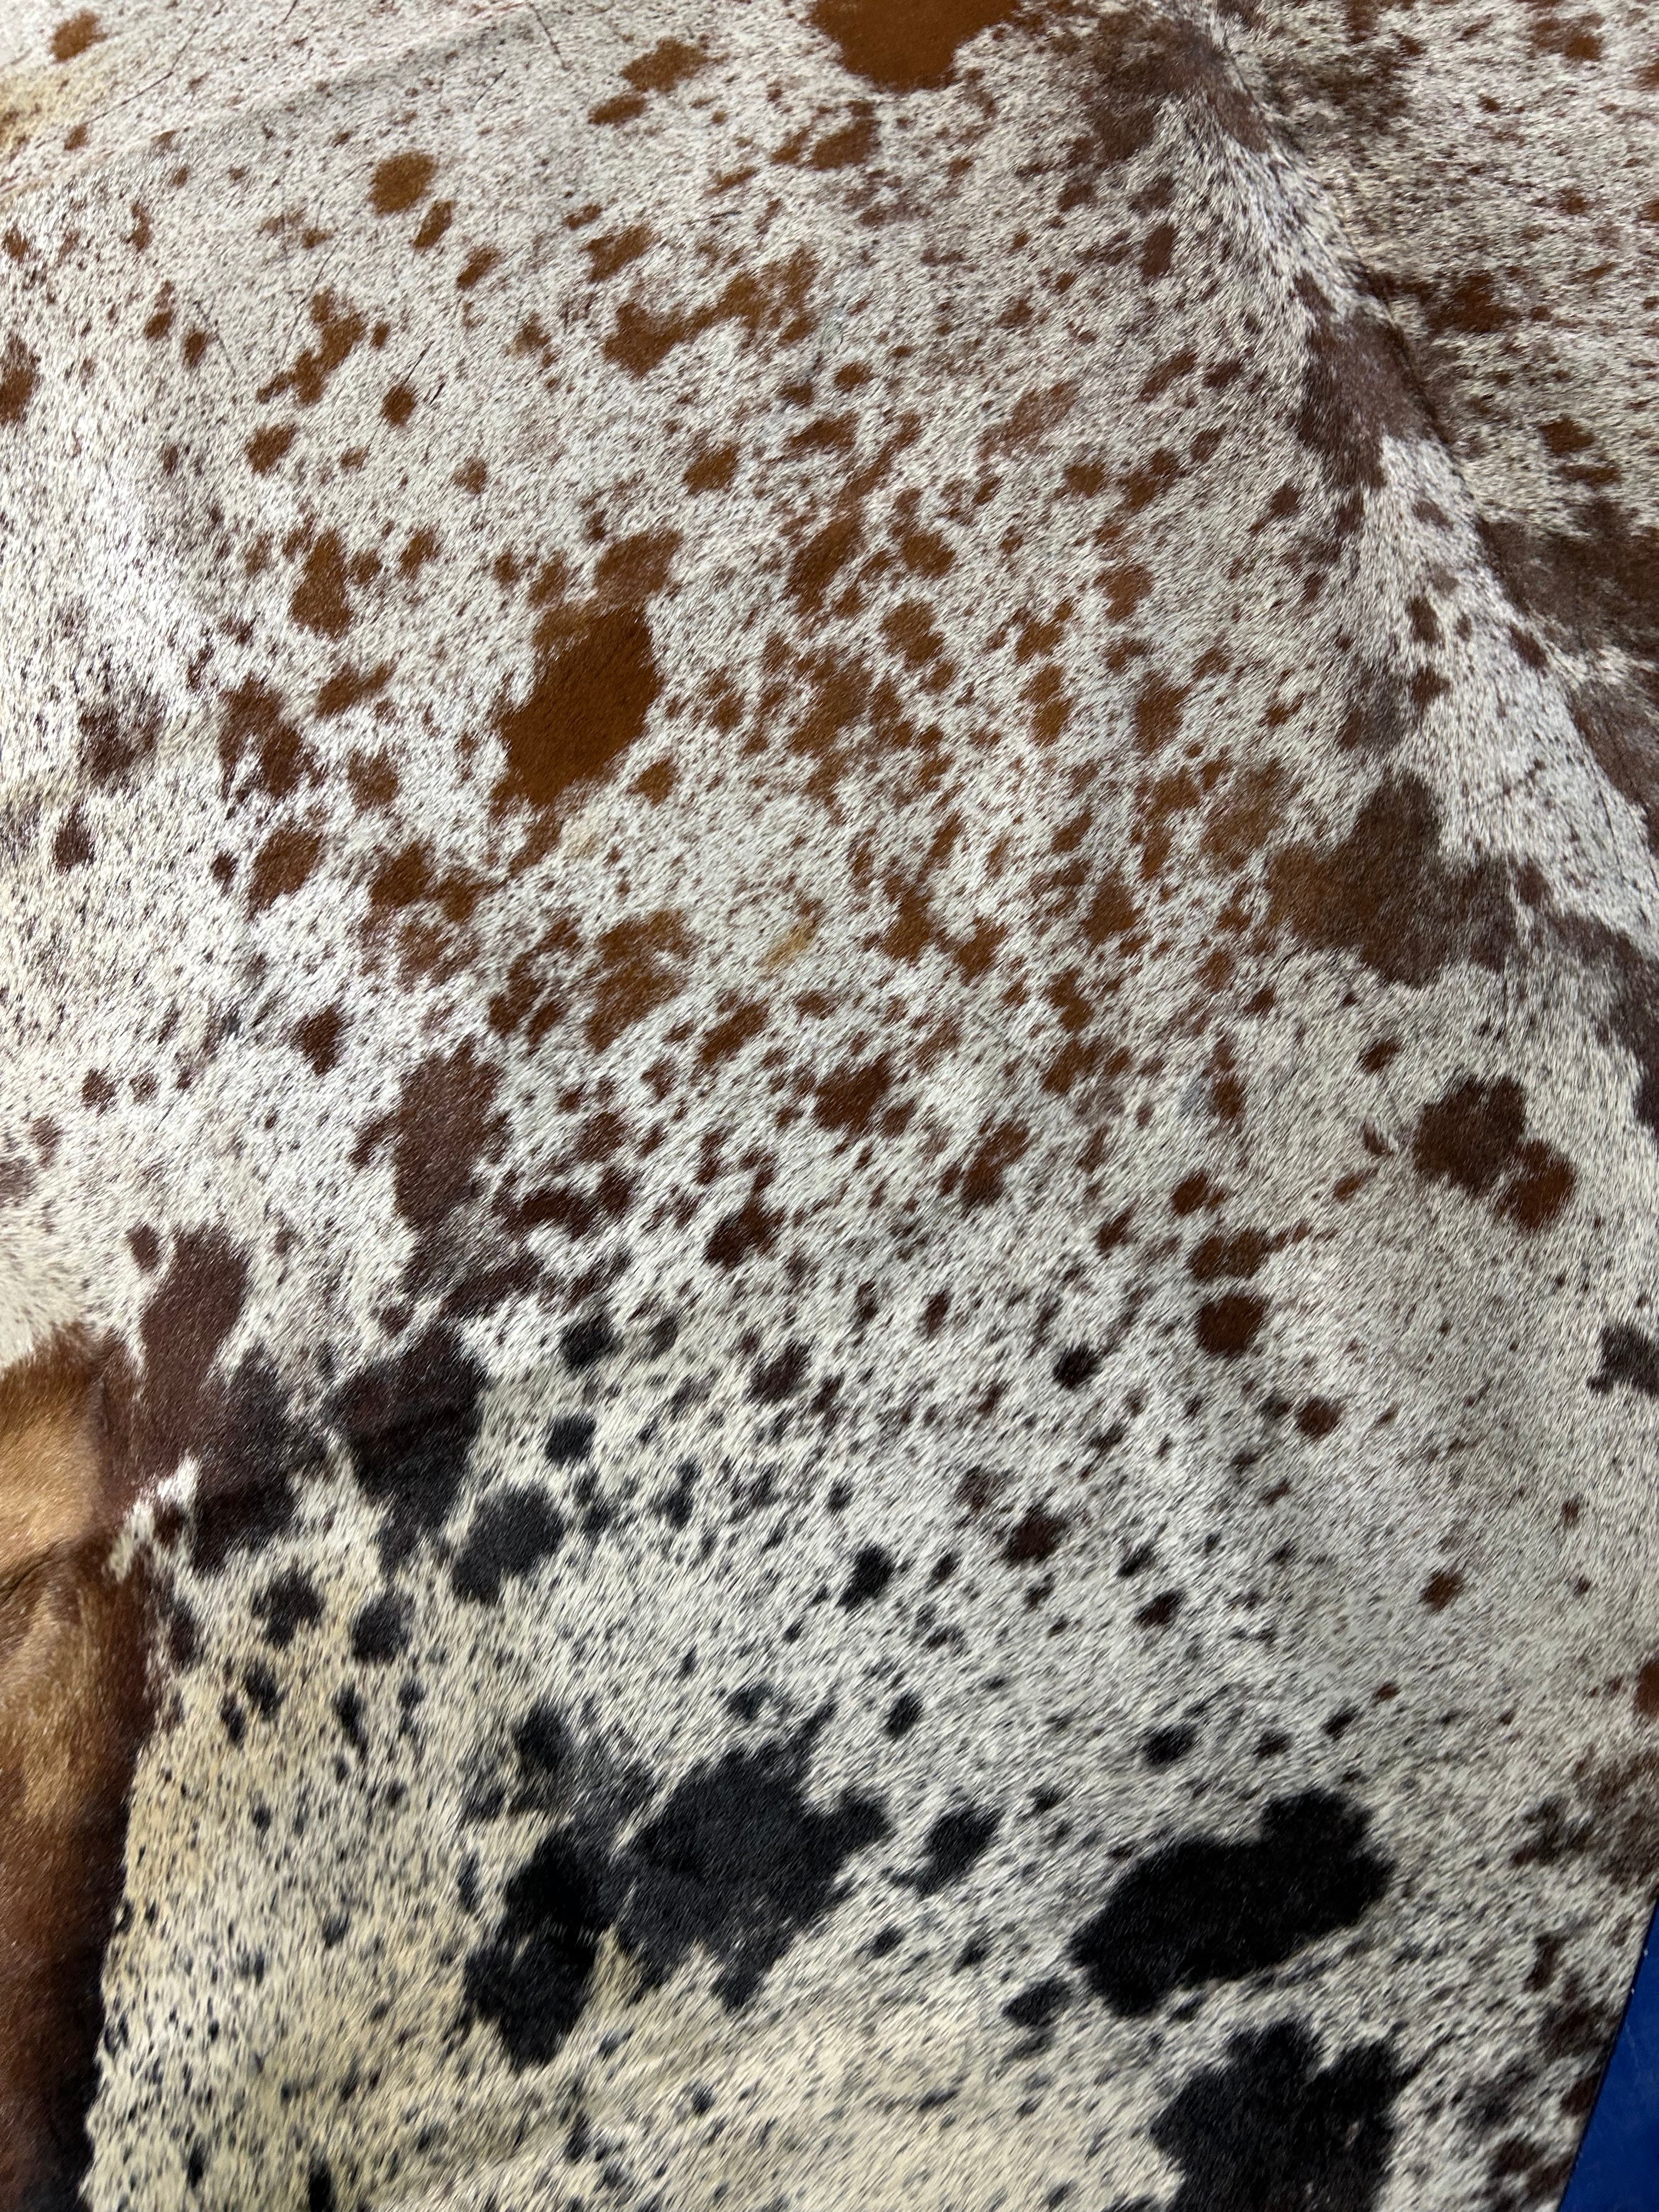 Gorgeous & Huge Speckled Brazilian Cowhide Rug (fire brands) Size: 8.2x7.5 feet O-413